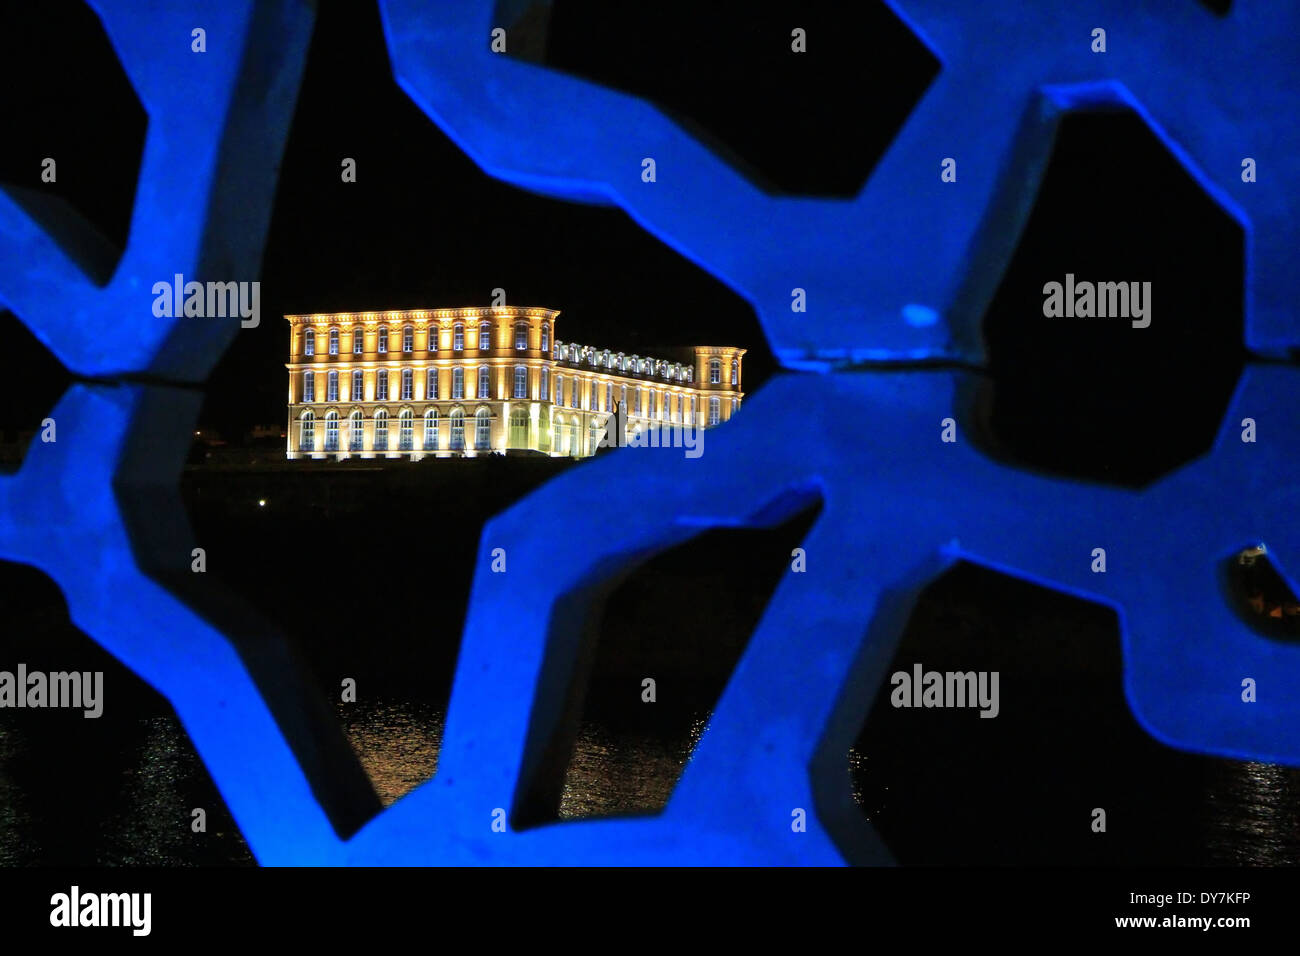 Pharo palace view from MUCEM at night, Marseille, Provence, France Stock Photo